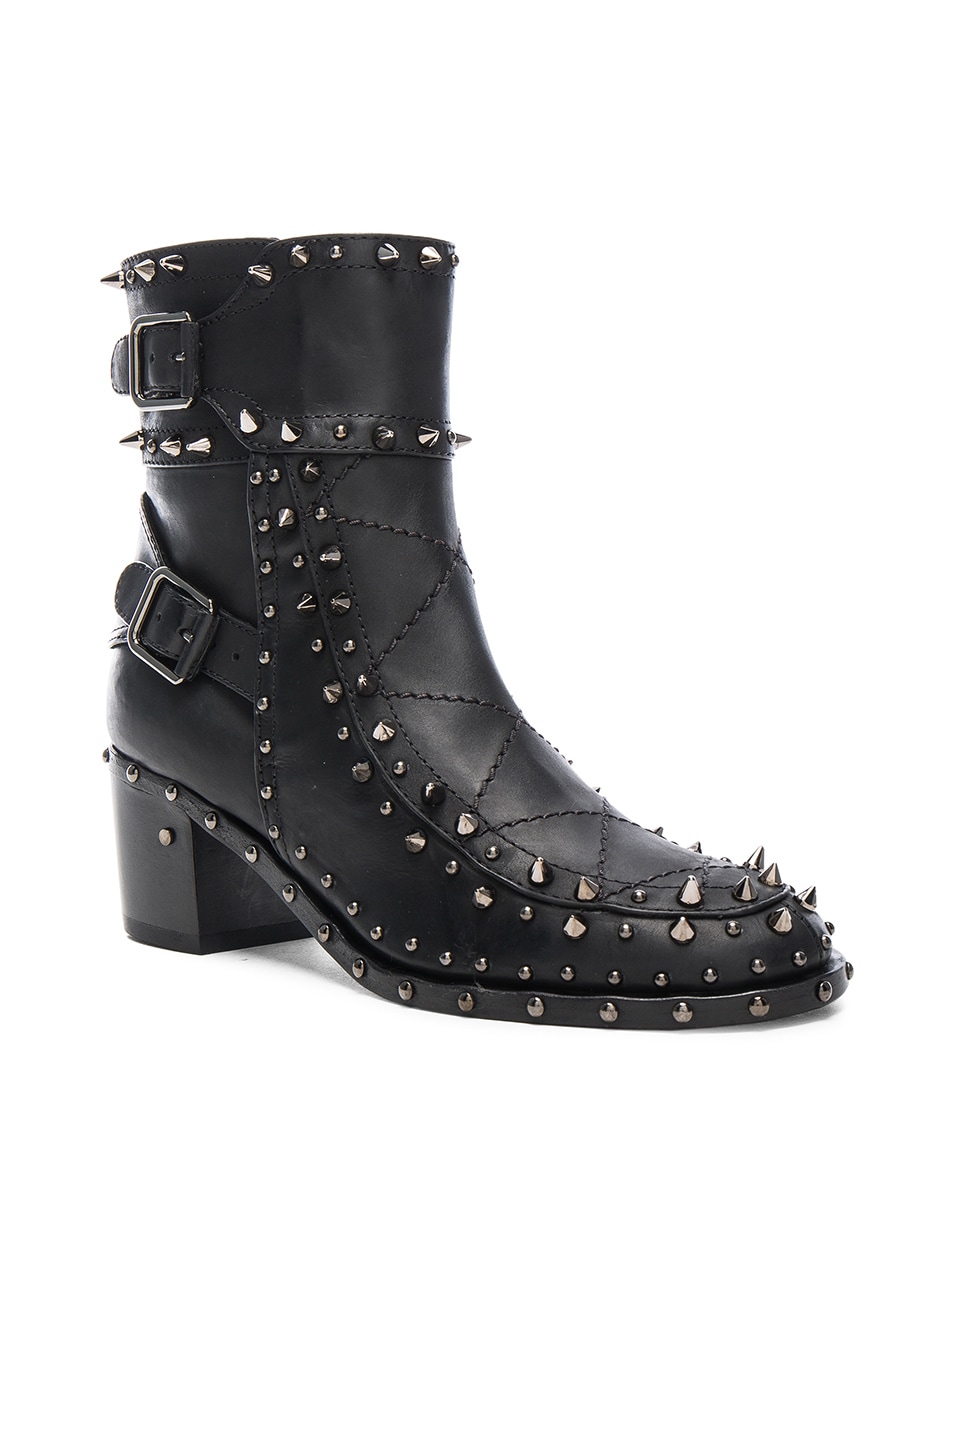 Laurence Dacade Badely Leather Boots in Black & Rutenium | FWRD